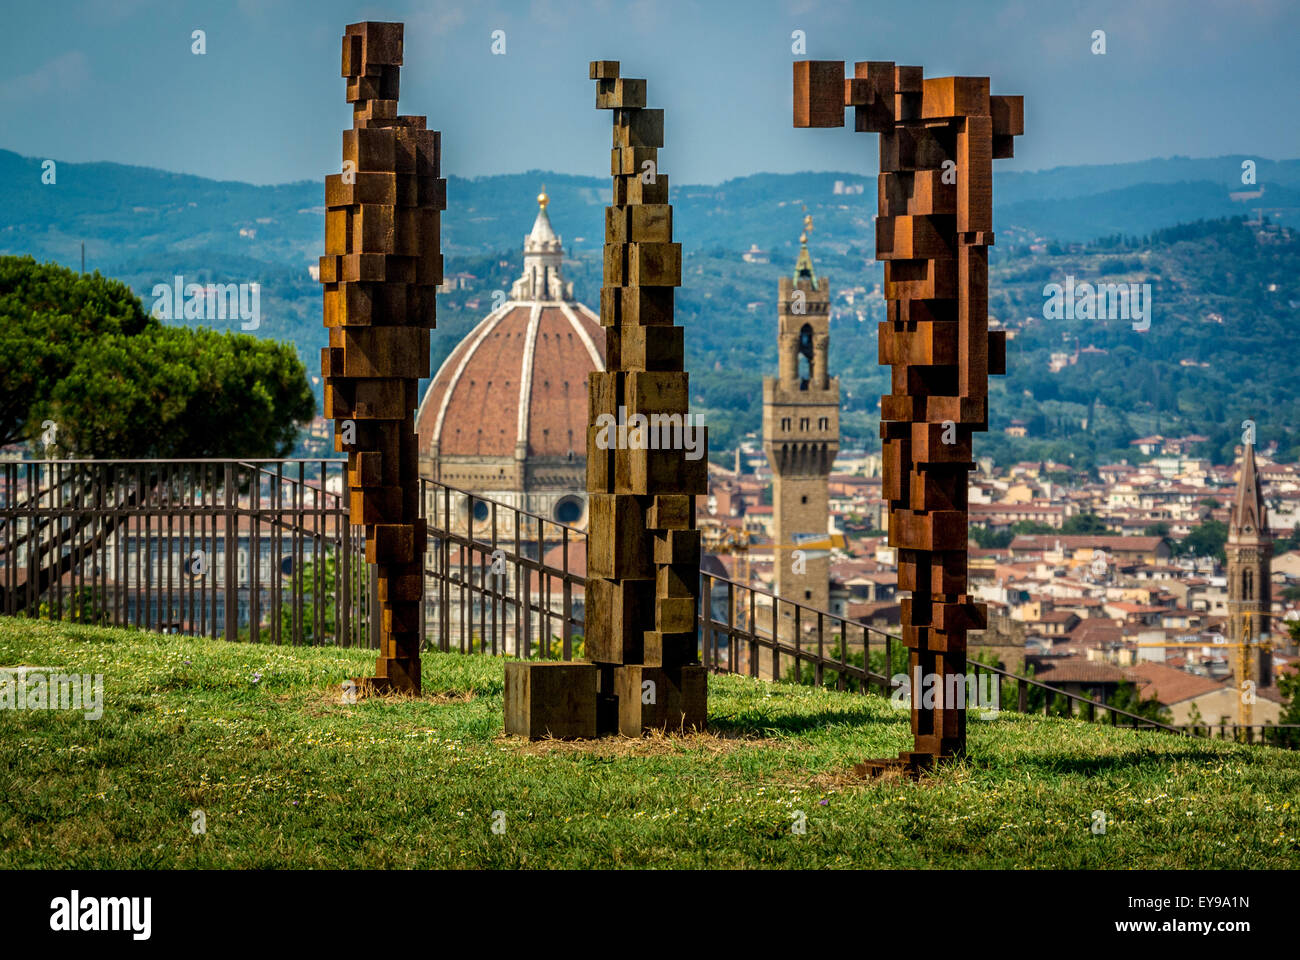 Antony Gormley  HUMAN sculpture exhibition at  Forte di Belvedere, Florence, Italy Stock Photo